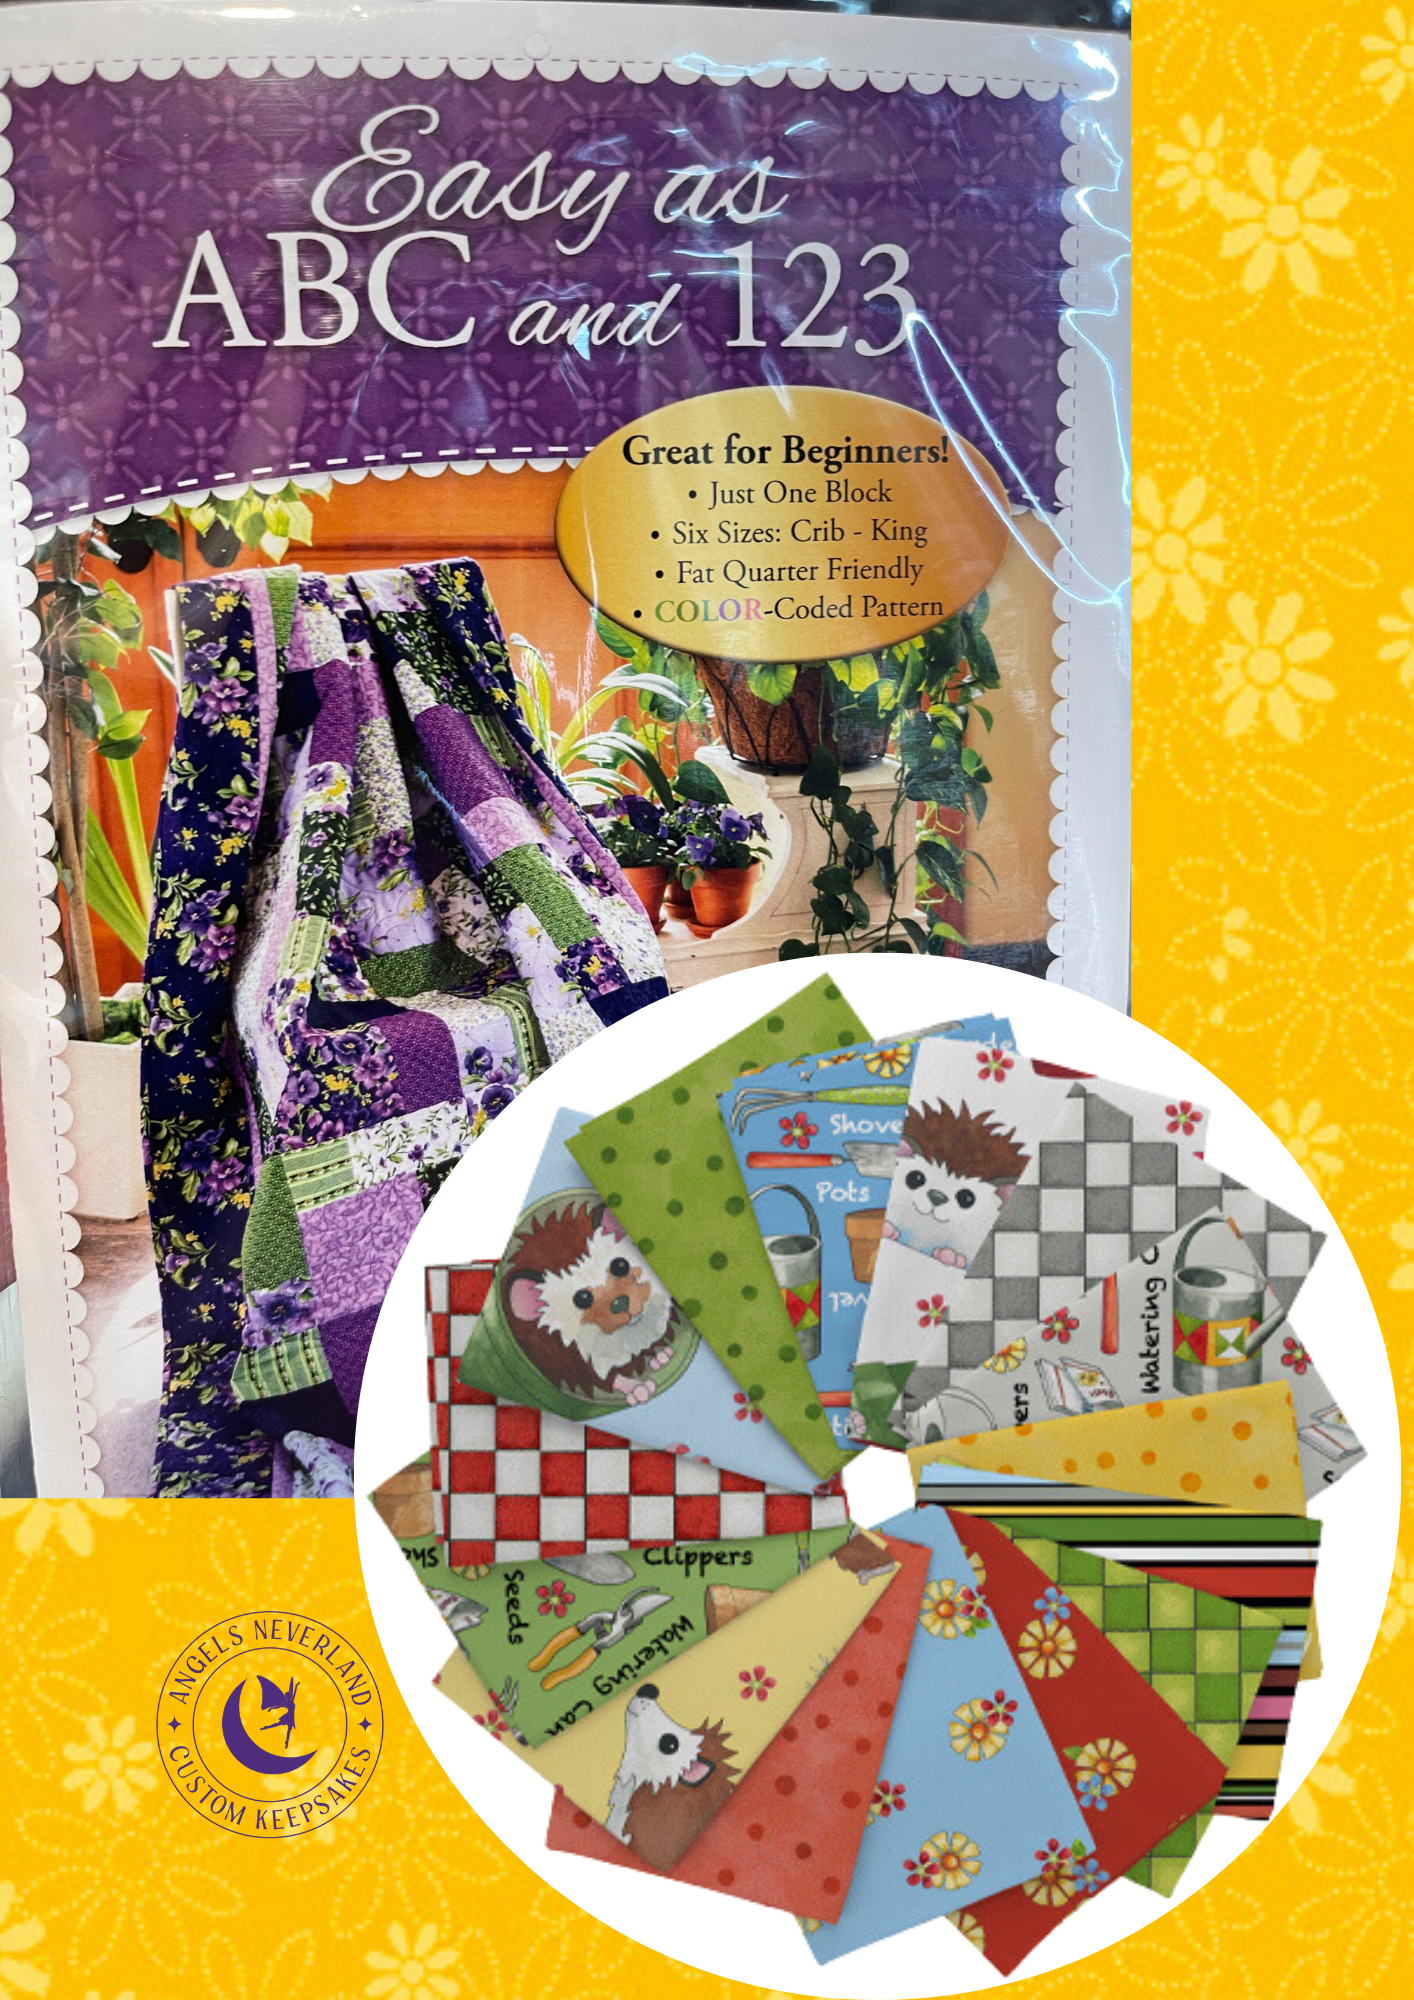 QT Fabrics Quilt Kit Quilt Kit w/backing 2 - yellow flowers Who Let The Hogs Out Beginner Quilt Kit Easy as ABC and 123 Pattern for Lap Size 57" x 75" quilt